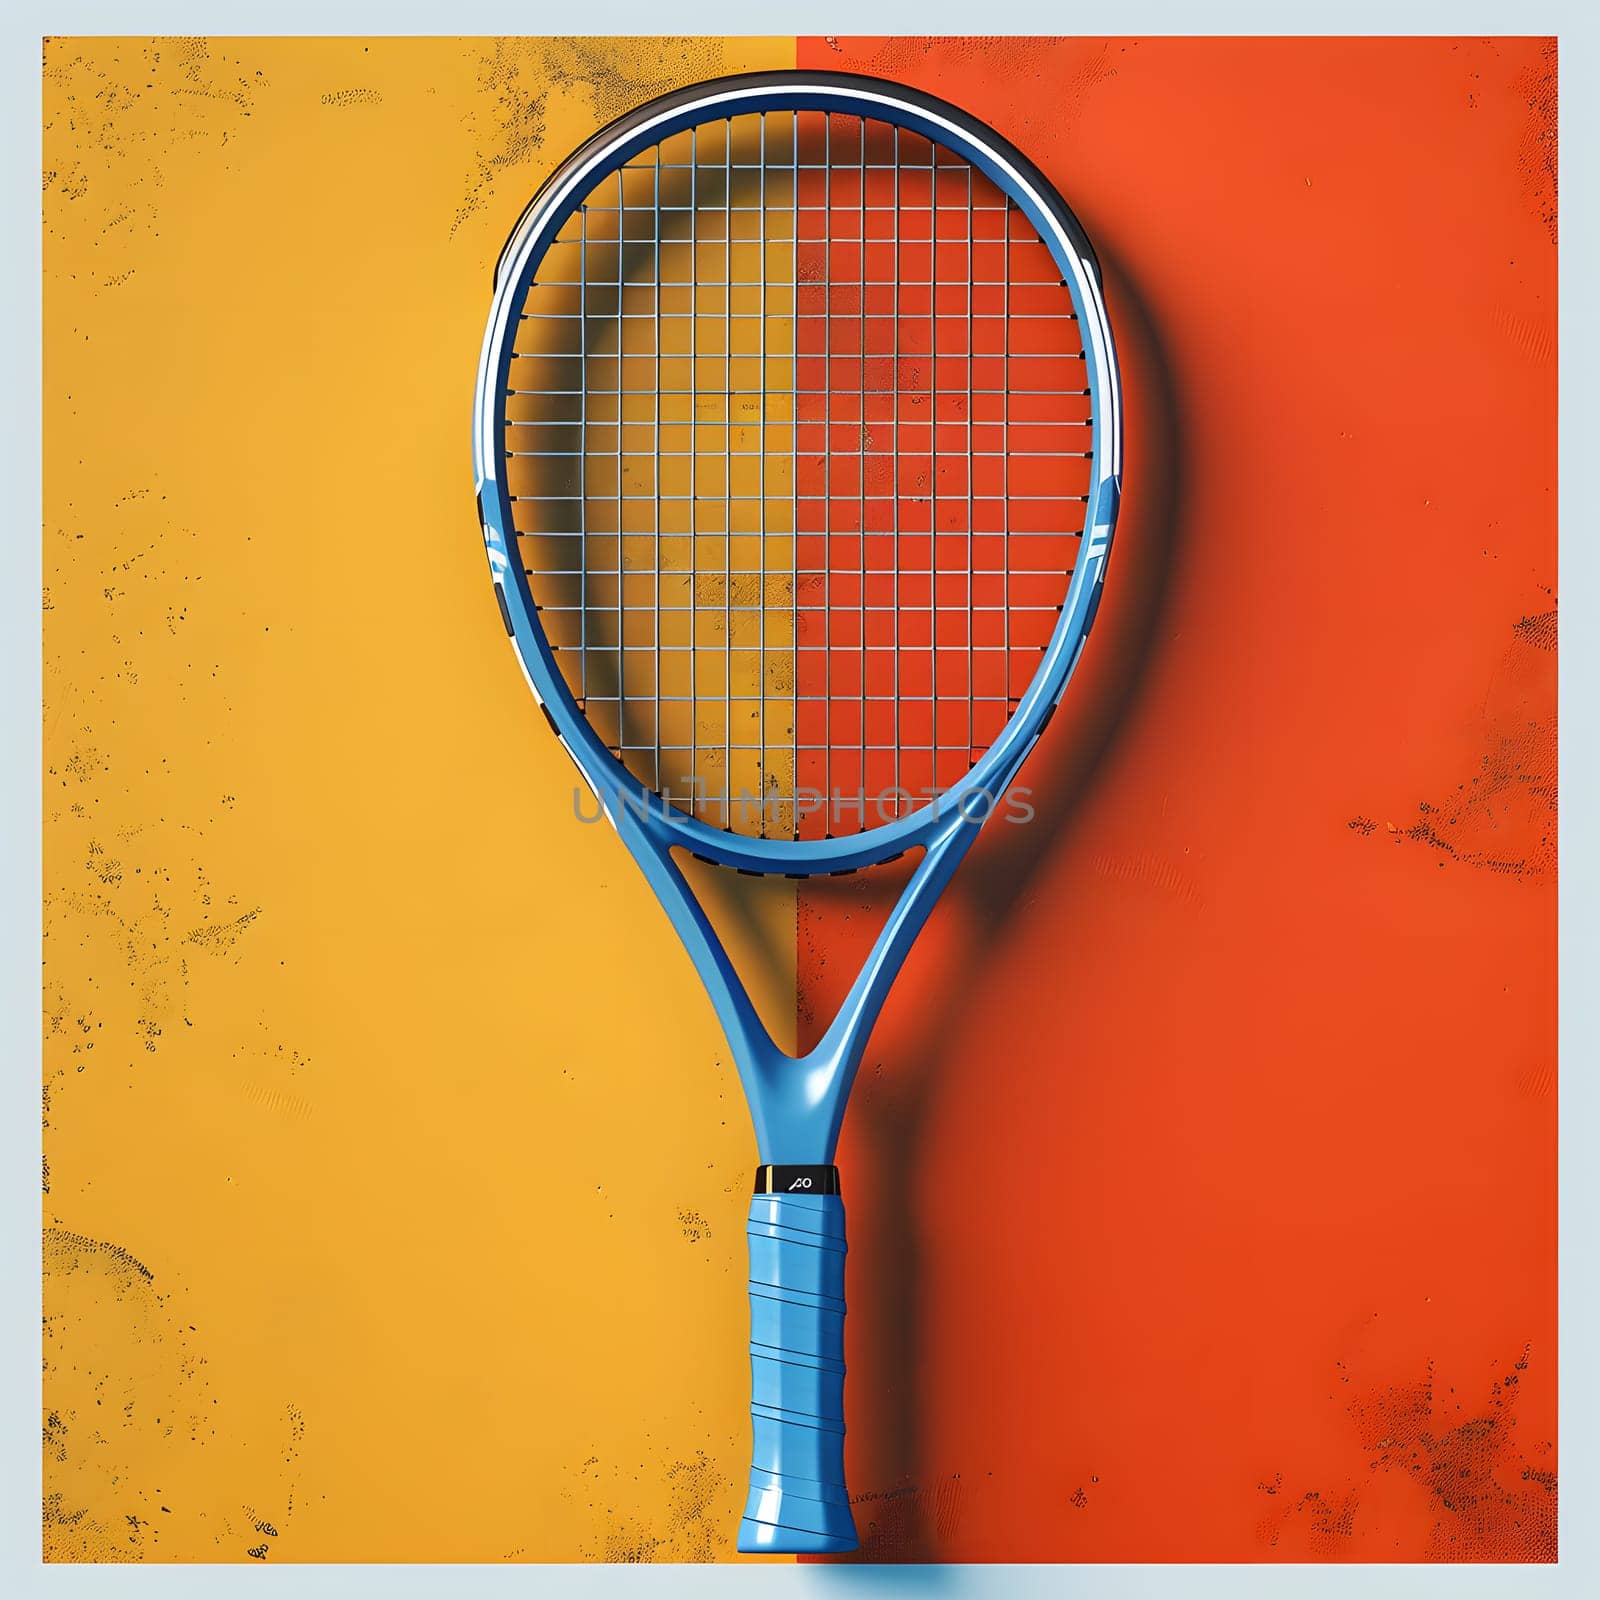 Electric blue tennis racket on vibrant red and yellow background by Nadtochiy